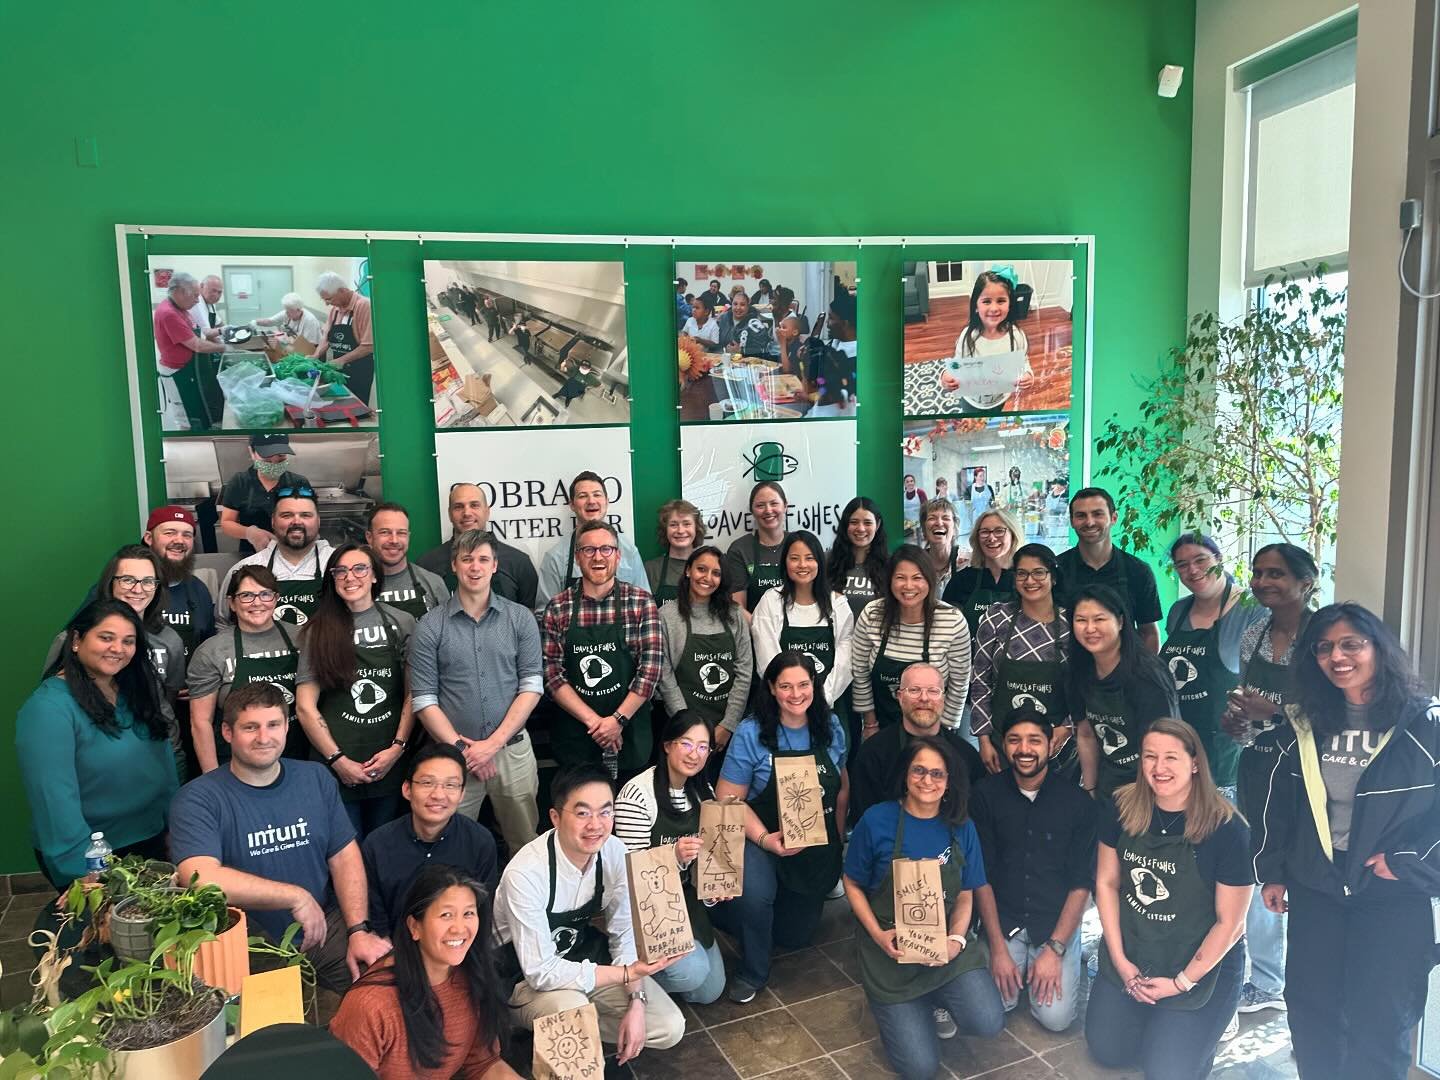 We want to send a huge THANK YOU to the @intuit team, who came out and volunteered to assemble over 1,000 brown bag lunches for our community! We couldn&rsquo;t do it without you, and we appreciate your support of our mission to fight food insecurity